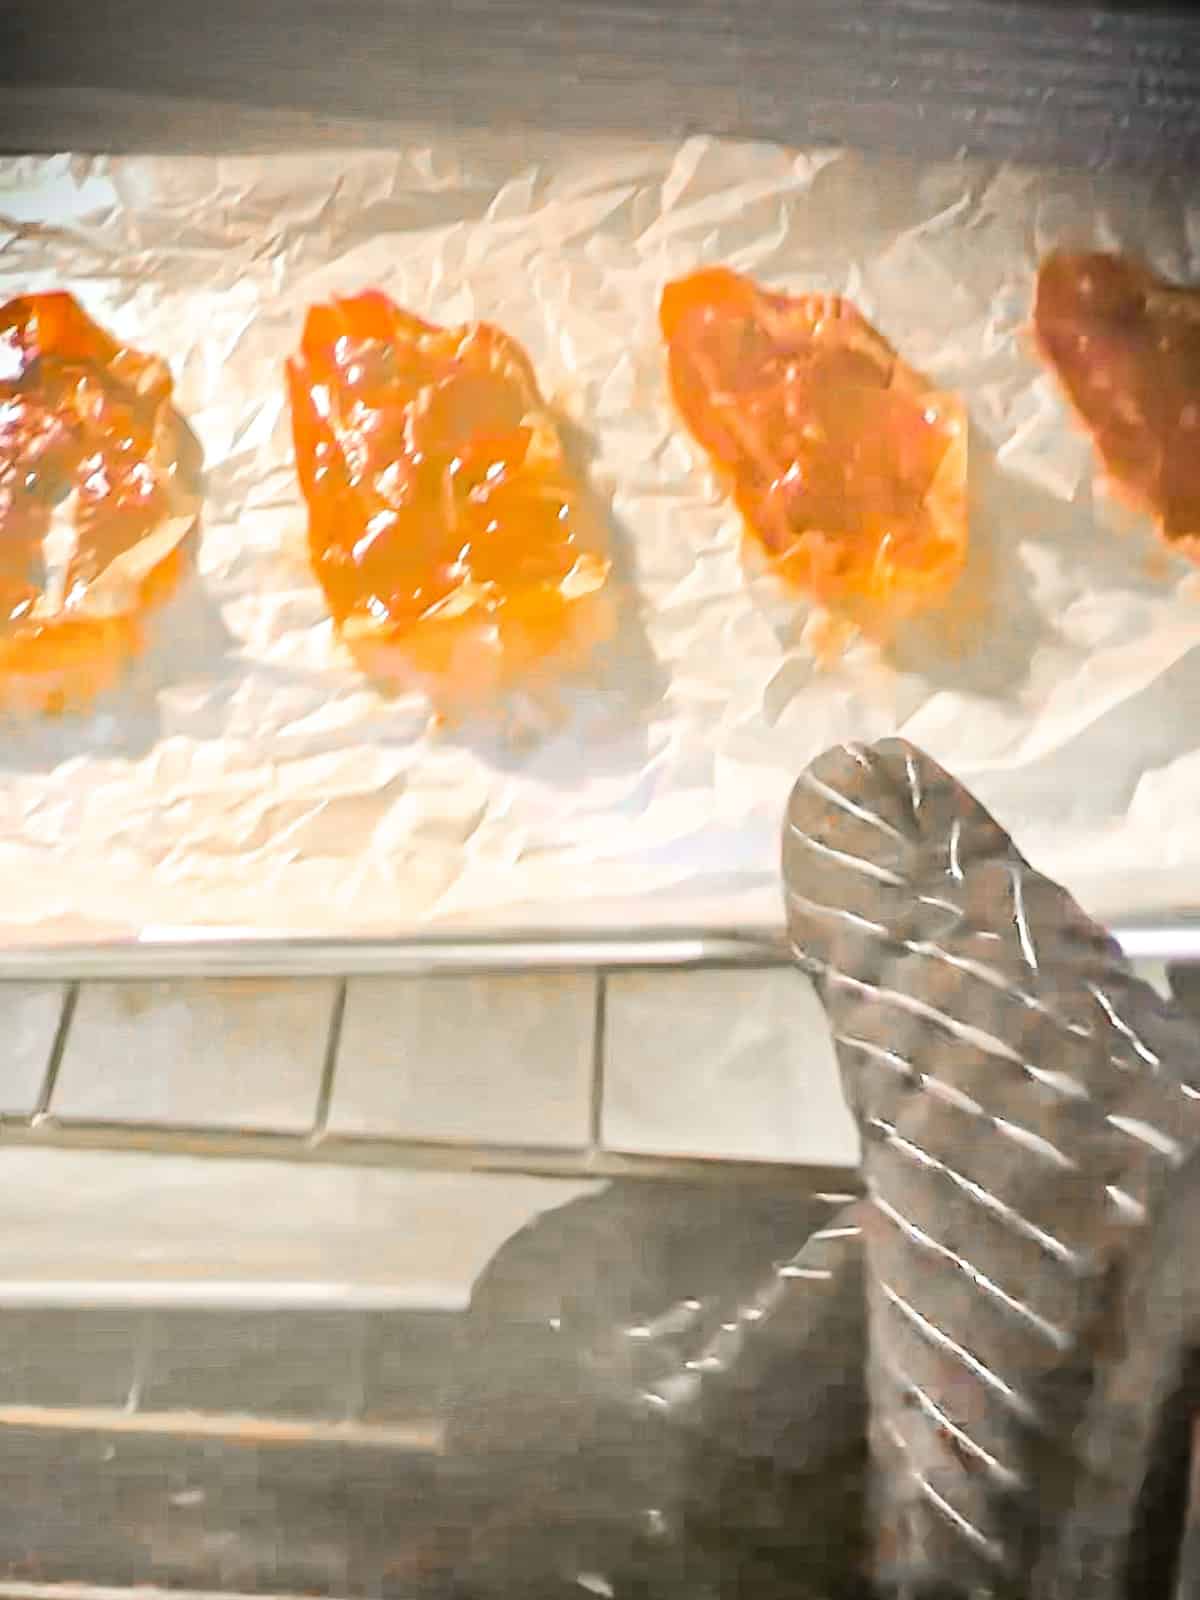 Removing a tray of half cooked prosciutto from the oven to switch oven racks with the second tray.